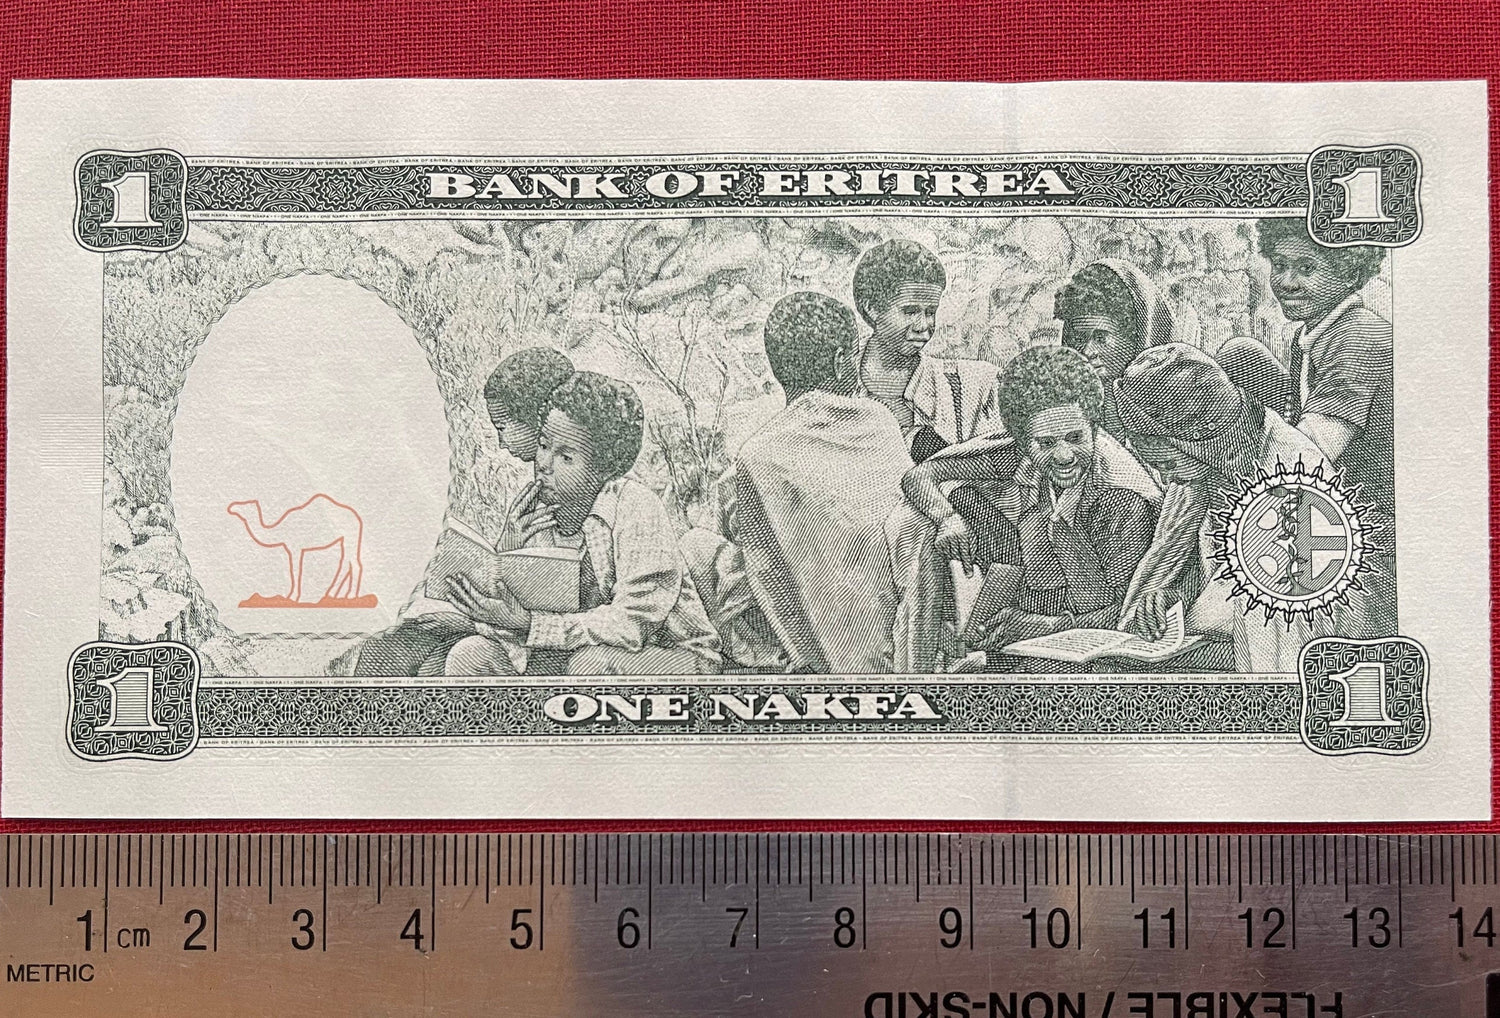 Three Girls & Youth Reading Books 1 Nafka Eritrea Authentic Banknote Money for Jewelry and Collage (Clarence Holbert) (Camel) Black Lives